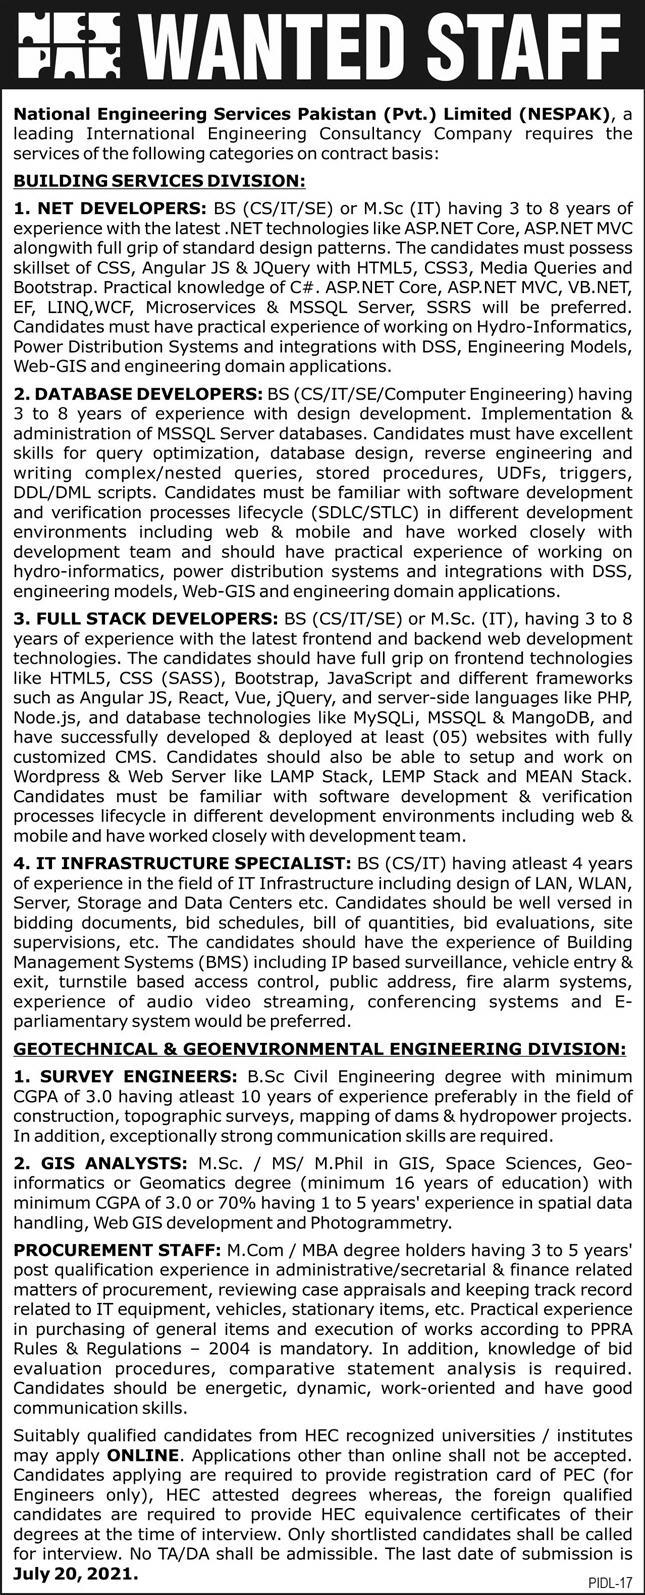 STAF Required in National Engineering Services Pakistan (pvt.) Limited (NESPAK)